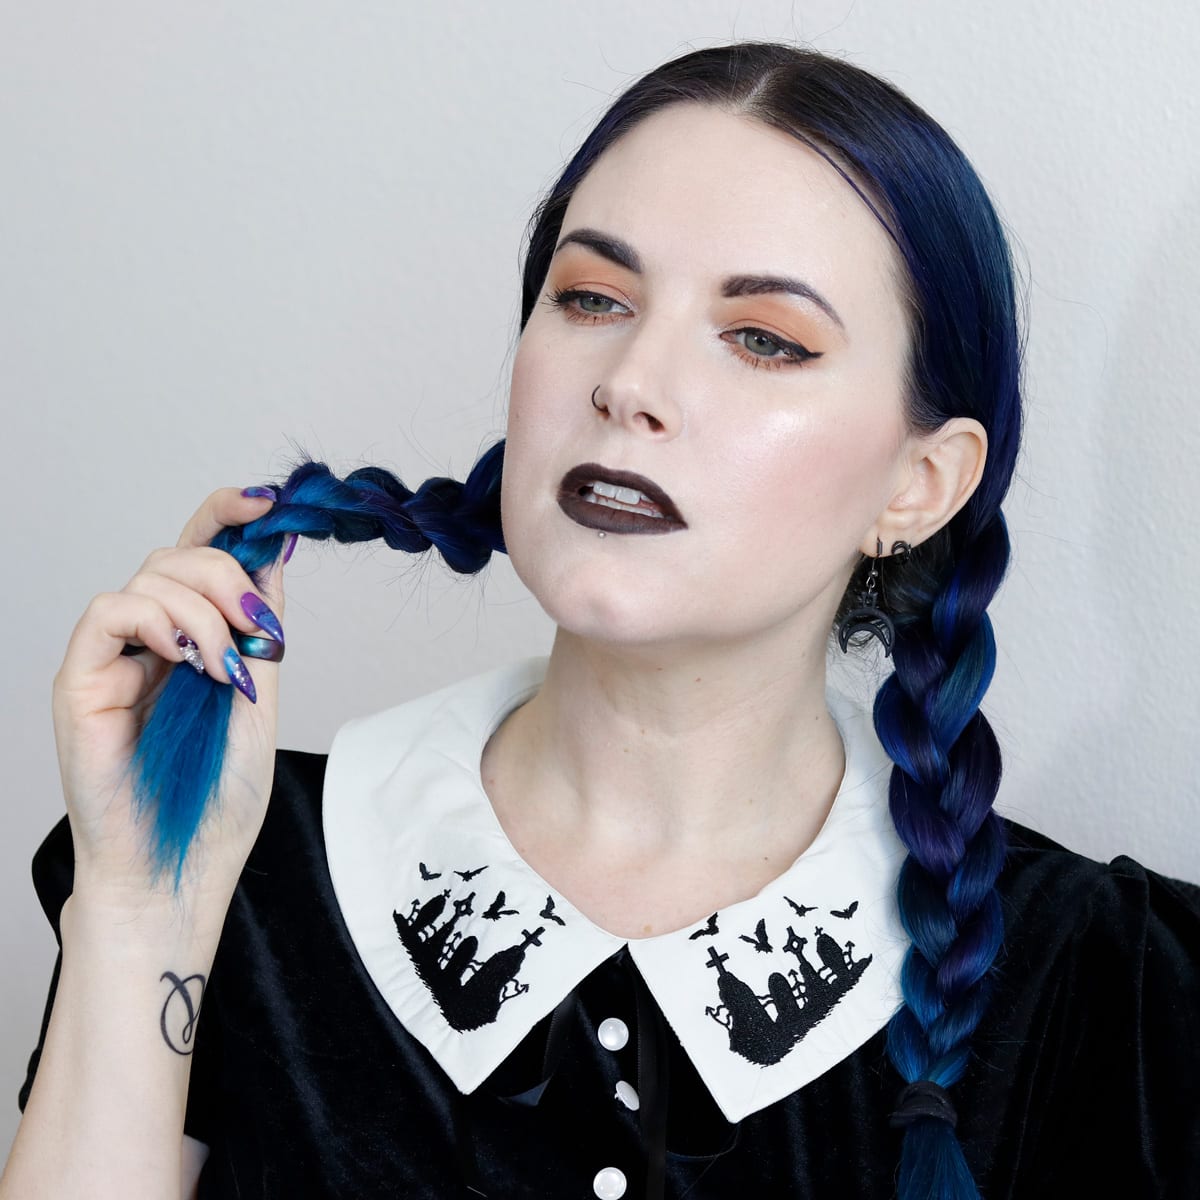 Everyday Gothic Makeup Tutorial for Halloween Makeup Ideas